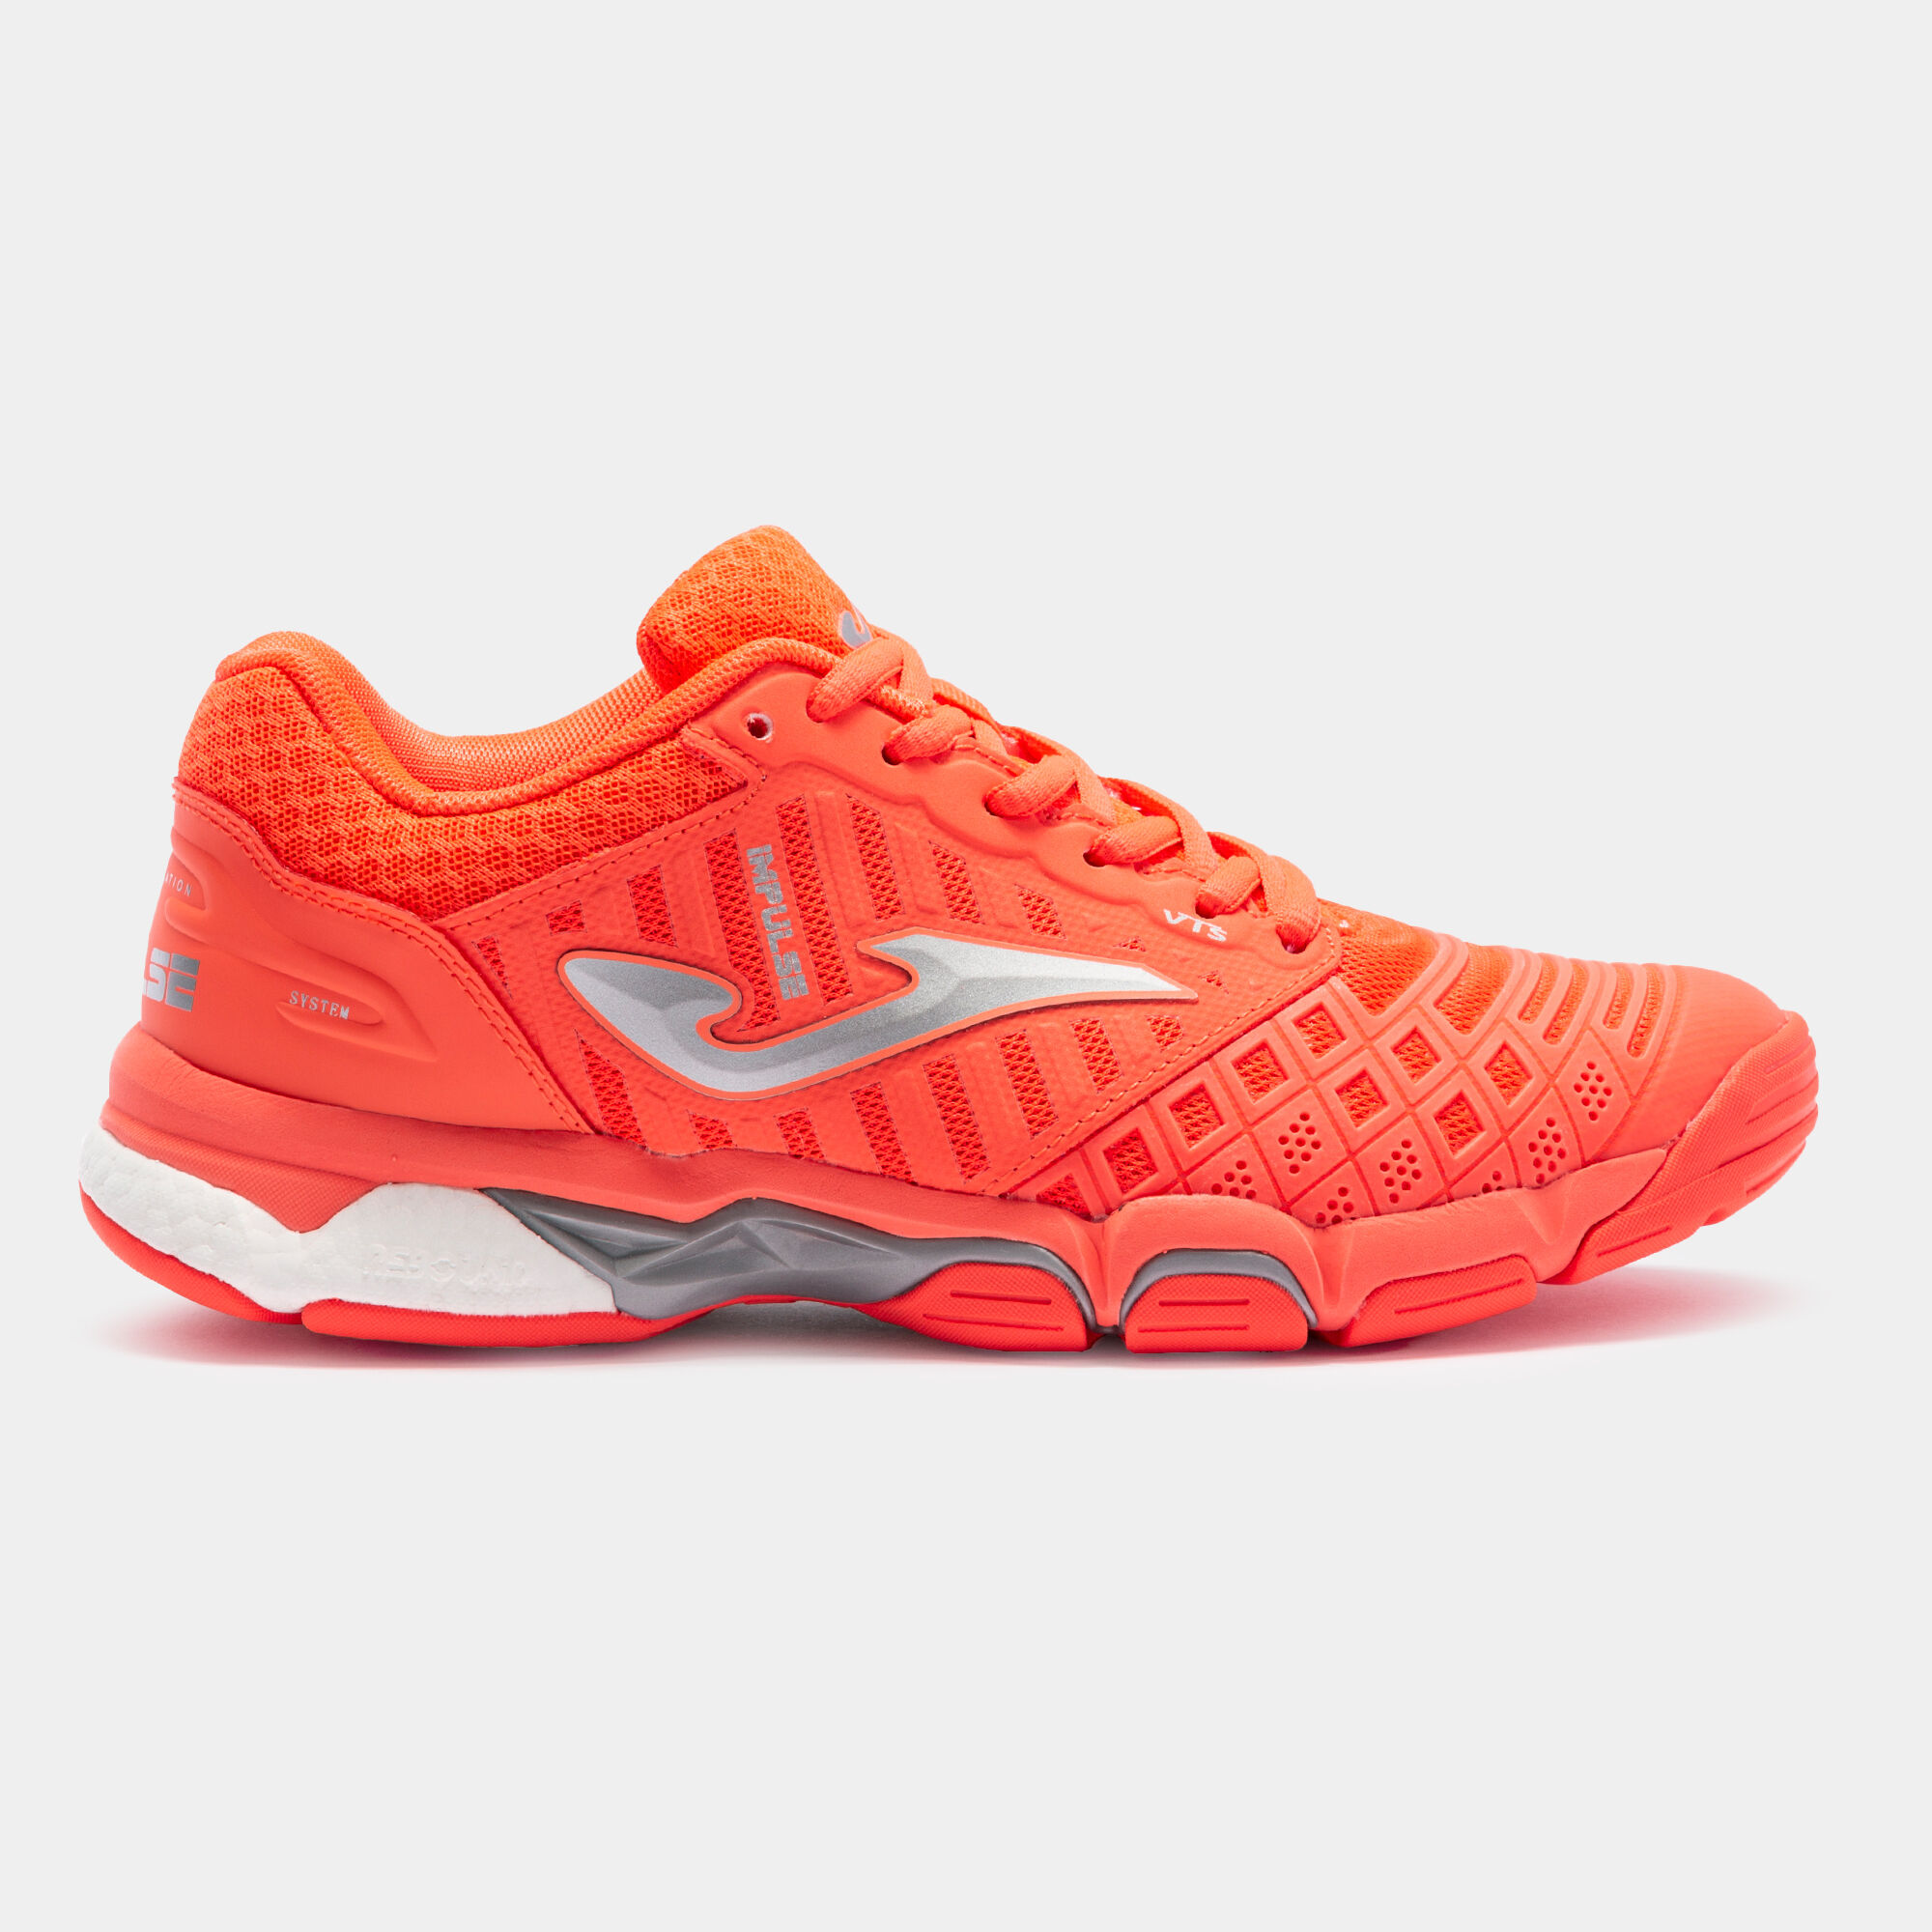 VOLLEYBALL SHOES IMPULSE 20 WOMAN CORAL